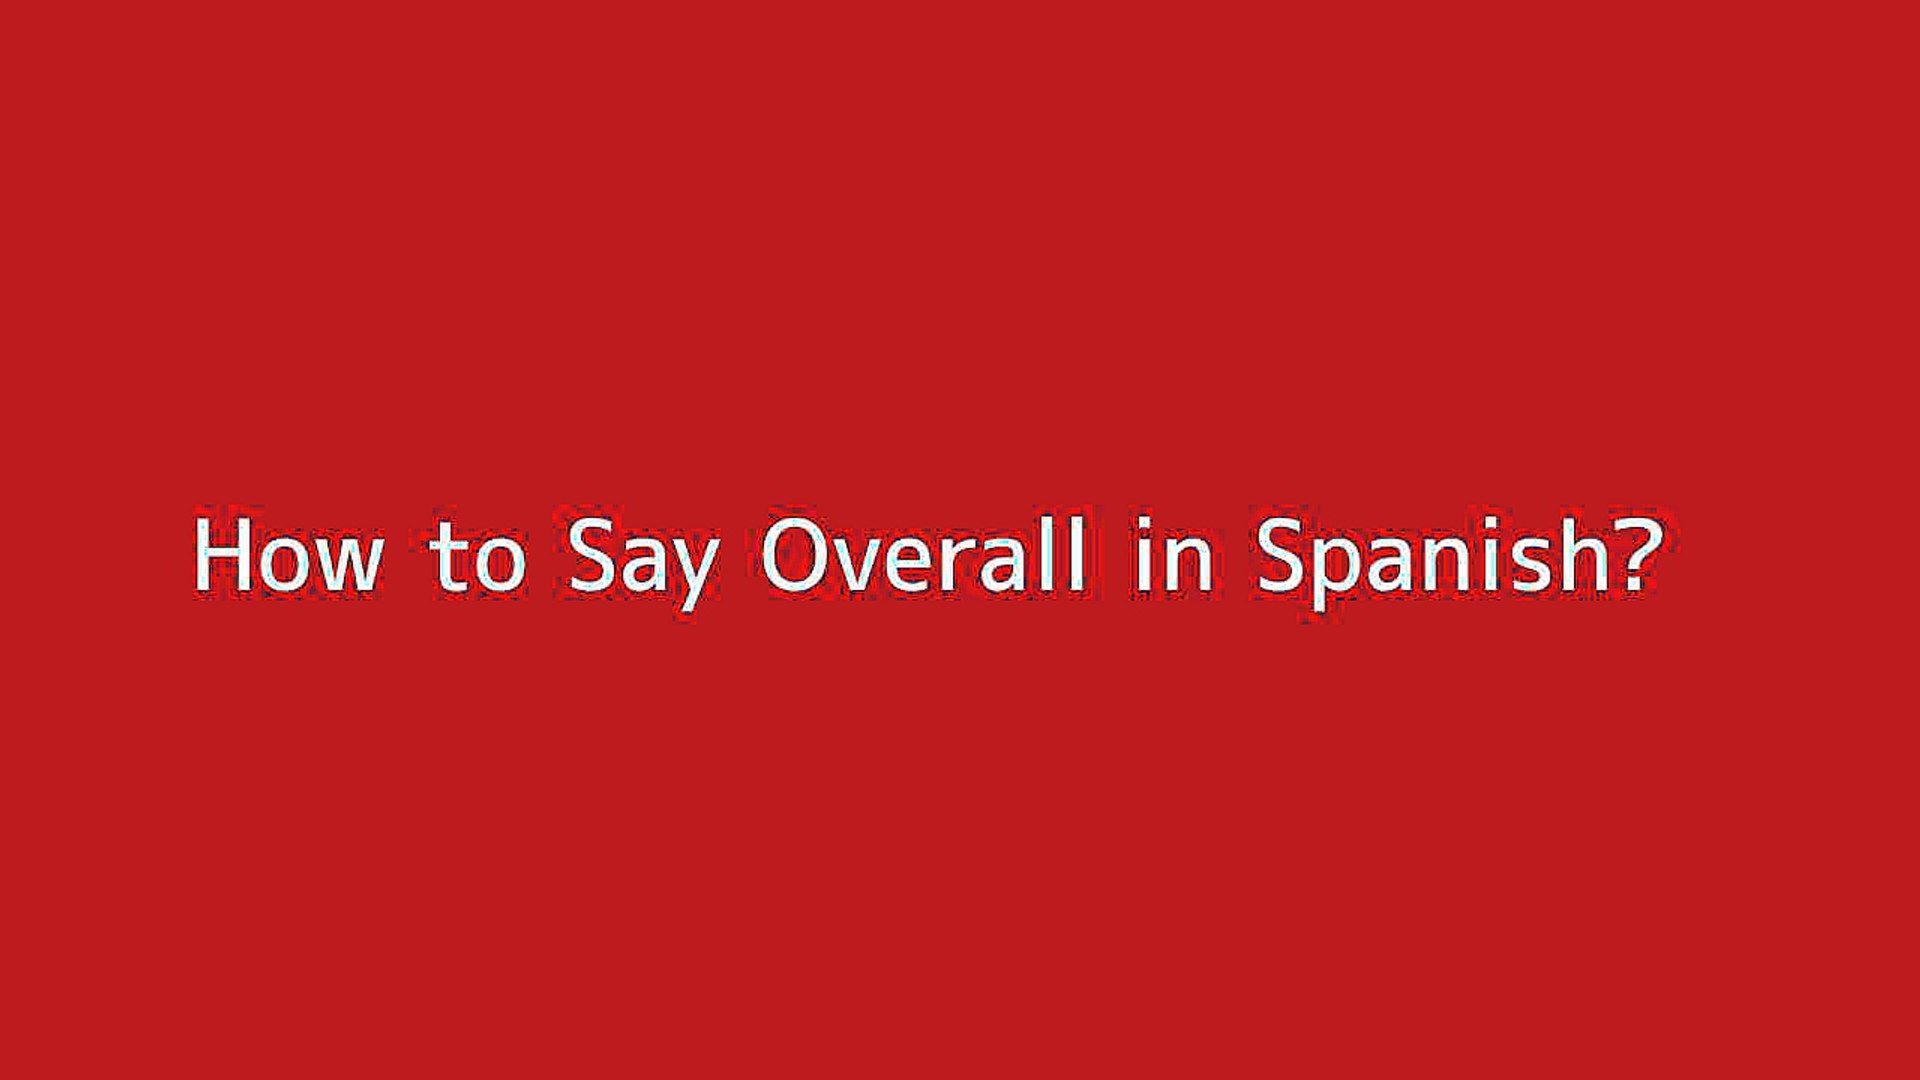 How to say Overall in Spanish - Vidéo Dailymotion